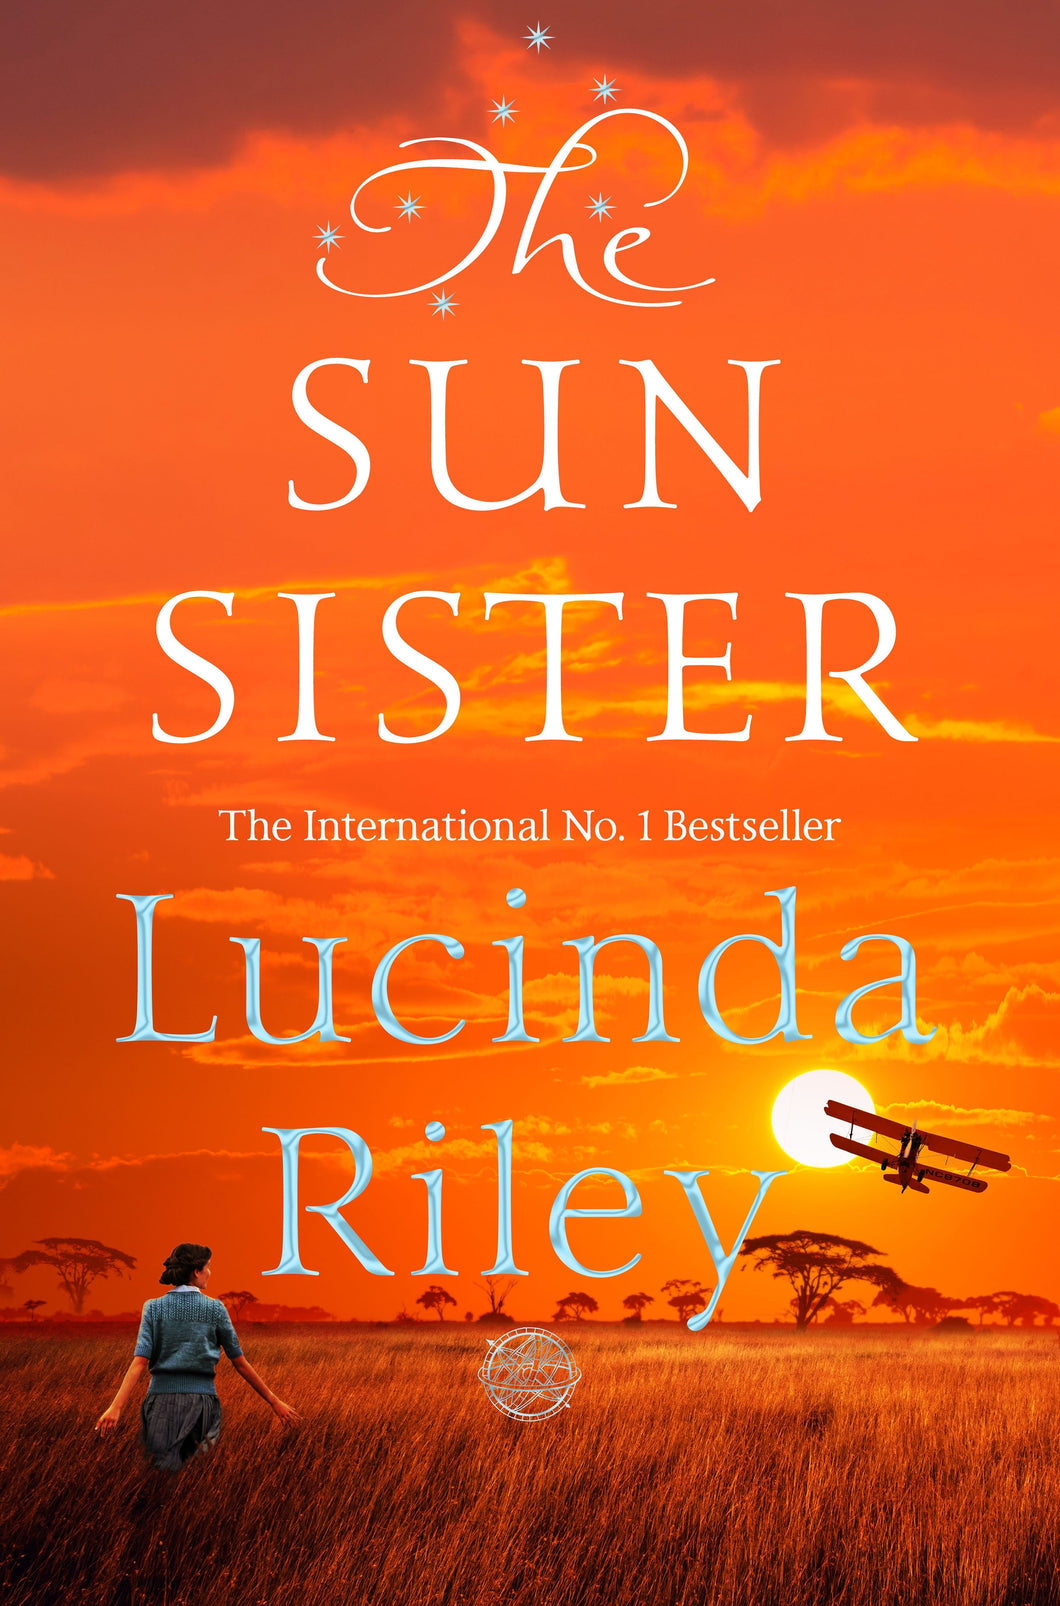 The Sun Sister by Lucinda Riley (Book 6)